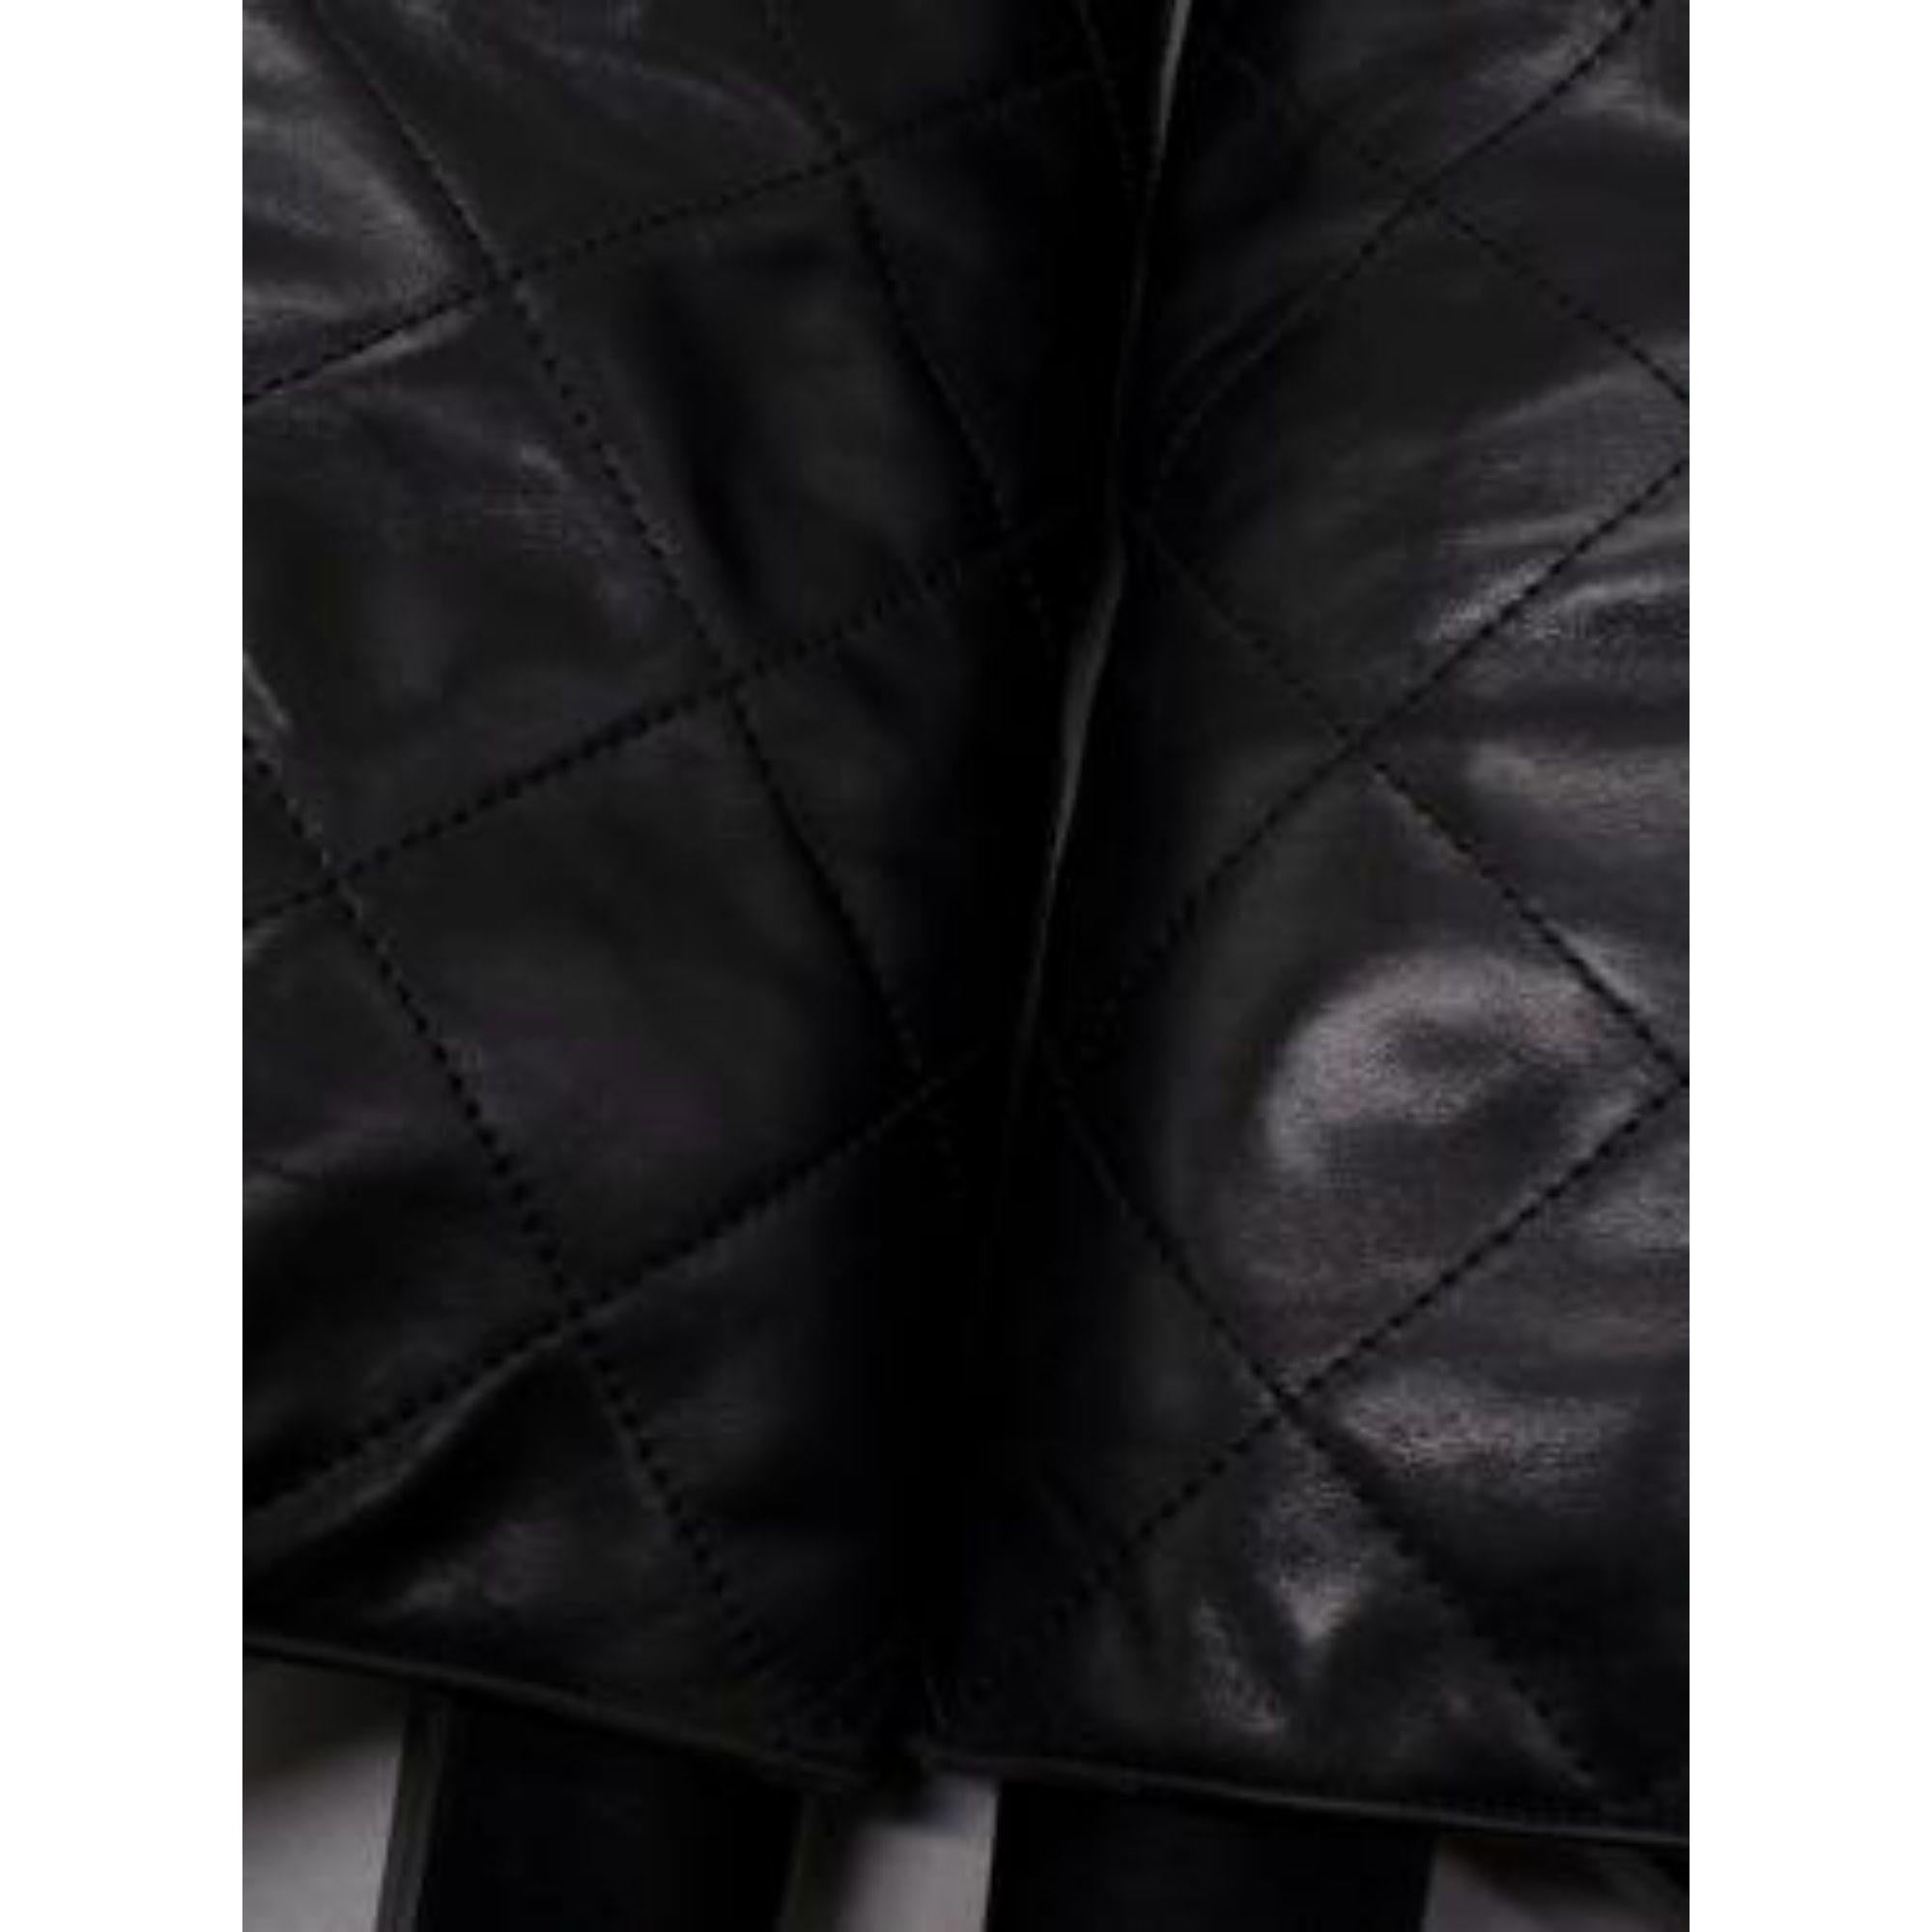 Chanel Black Quilted Leather Knee-high Boots For Sale 6